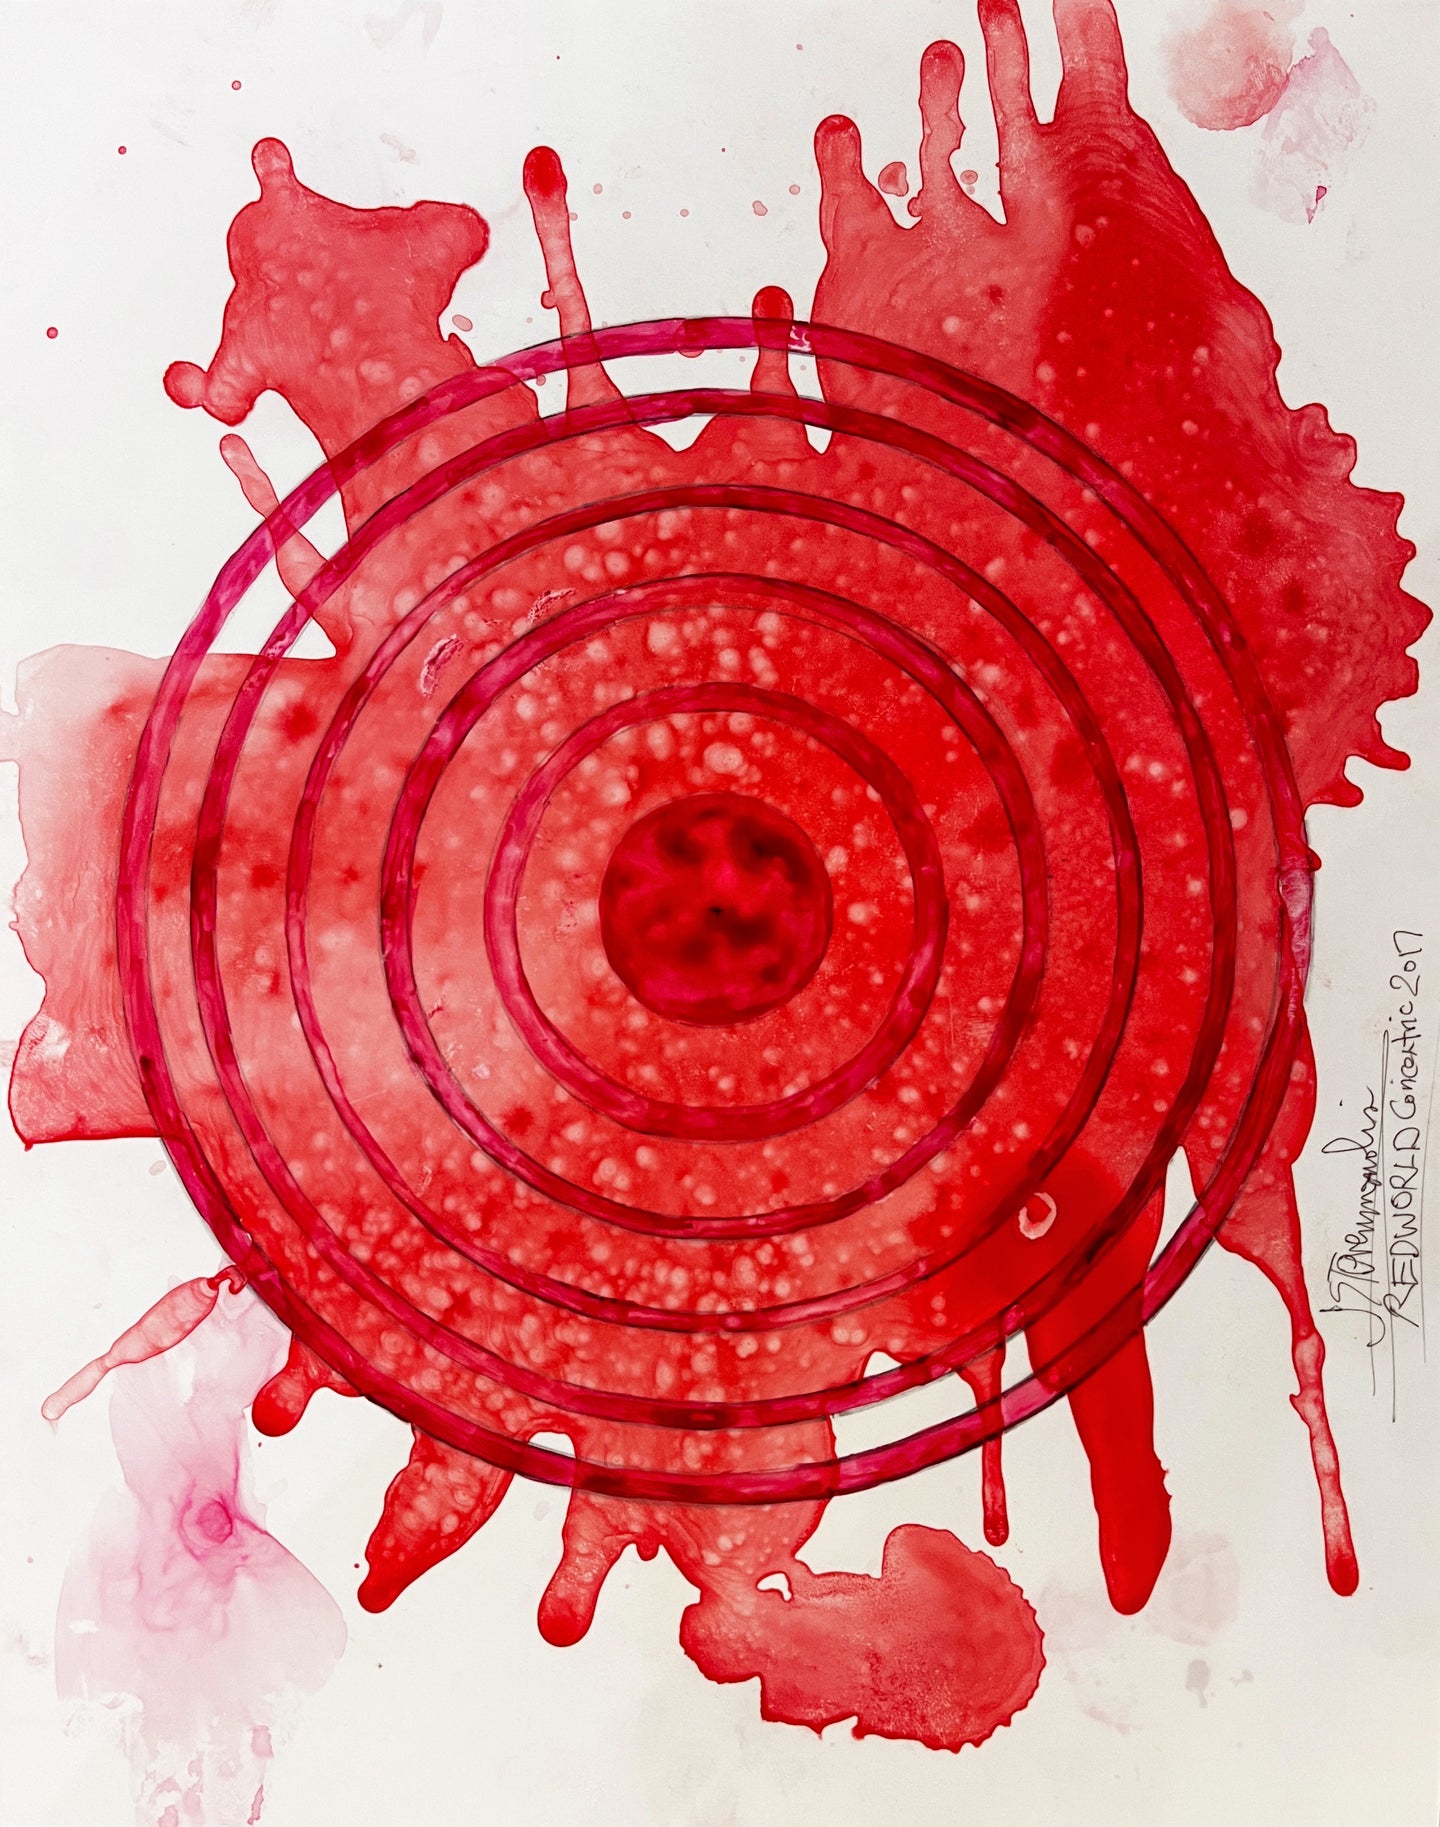 J. Steven Manolis', 17 x 14 inch, red concentric abstract expressionist painting, REDWORLD 17 (Concentric), in vitreous acrylic paint on paper